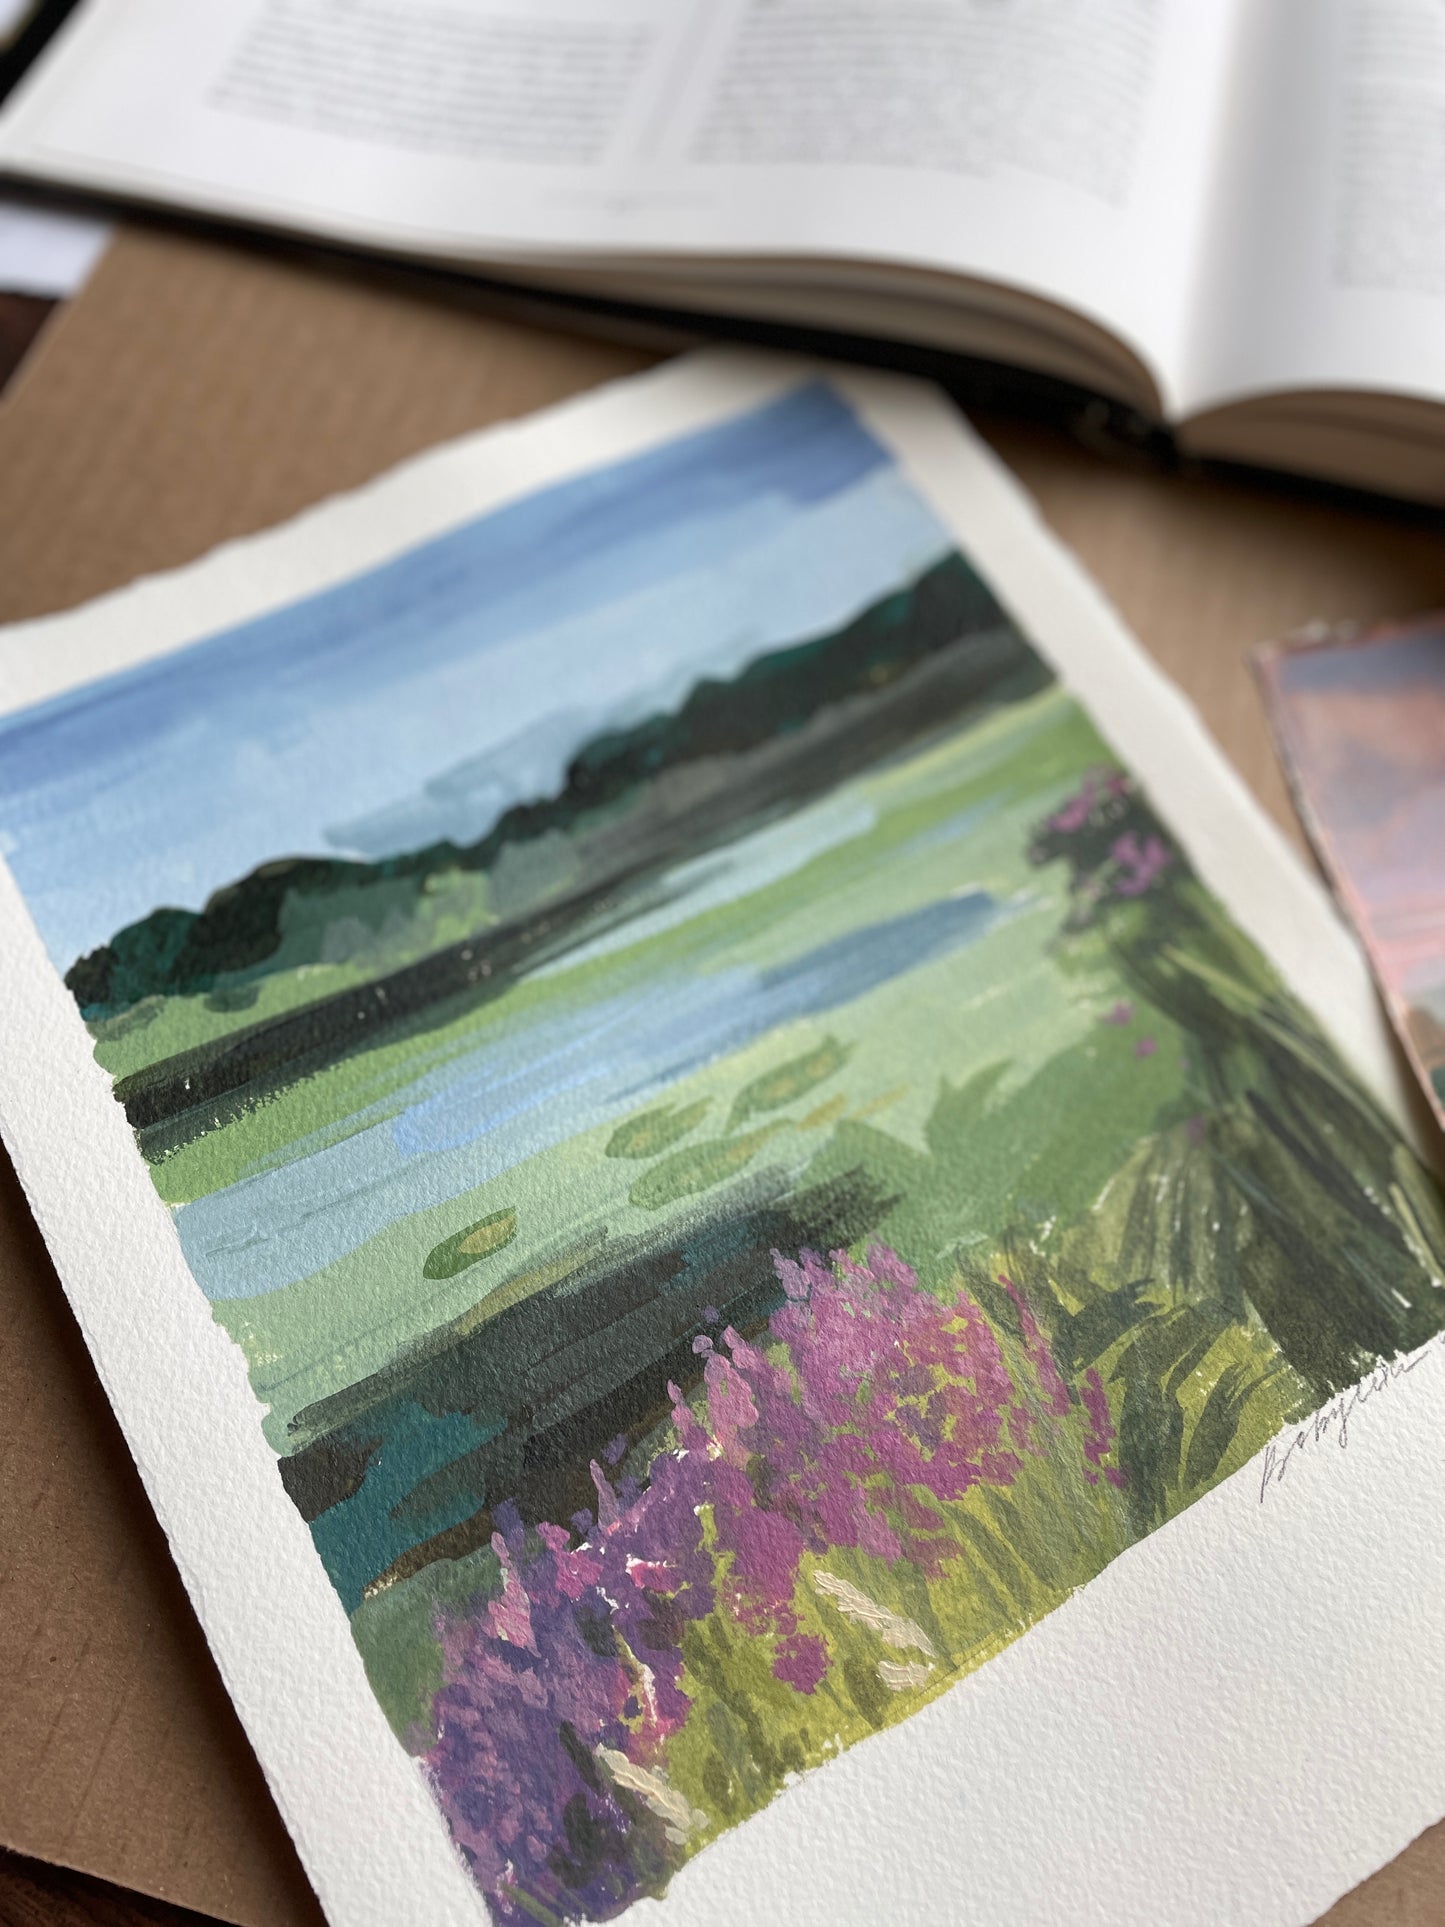 Lake landscape. Painting on paper.